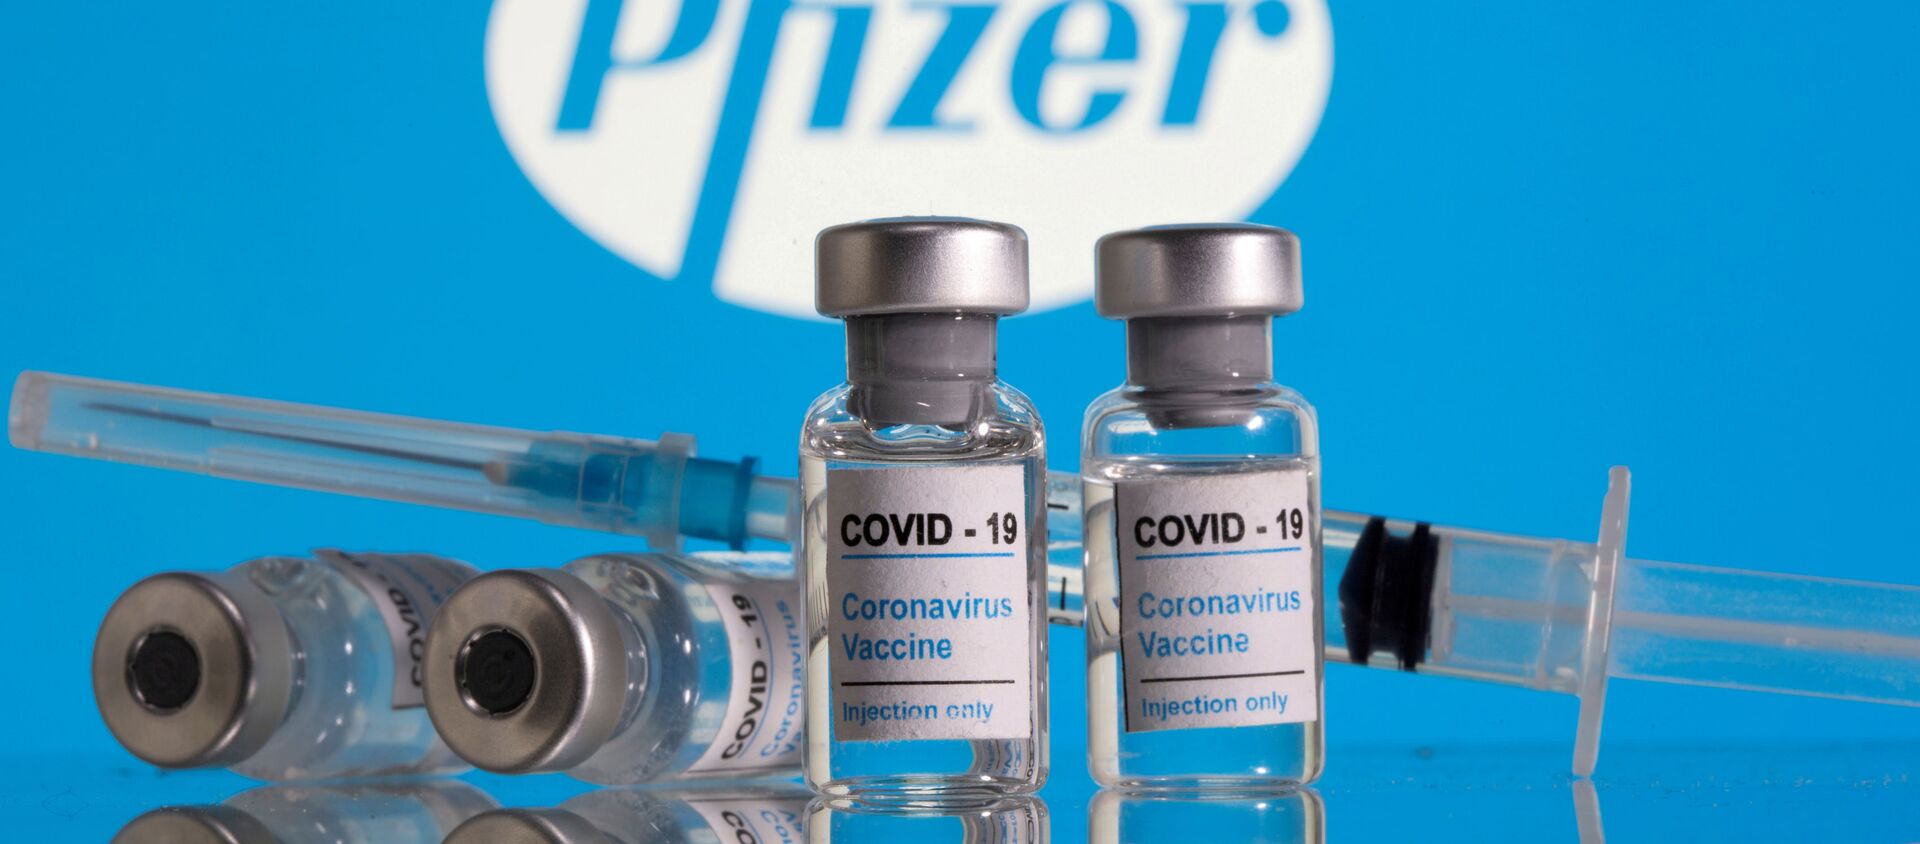 Vials labelled COVID-19 Coronavirus Vaccine and a syringe are seen in front of the Pfizer logo in this illustration taken February 9, 2021 - Sputnik International, 1920, 23.04.2021